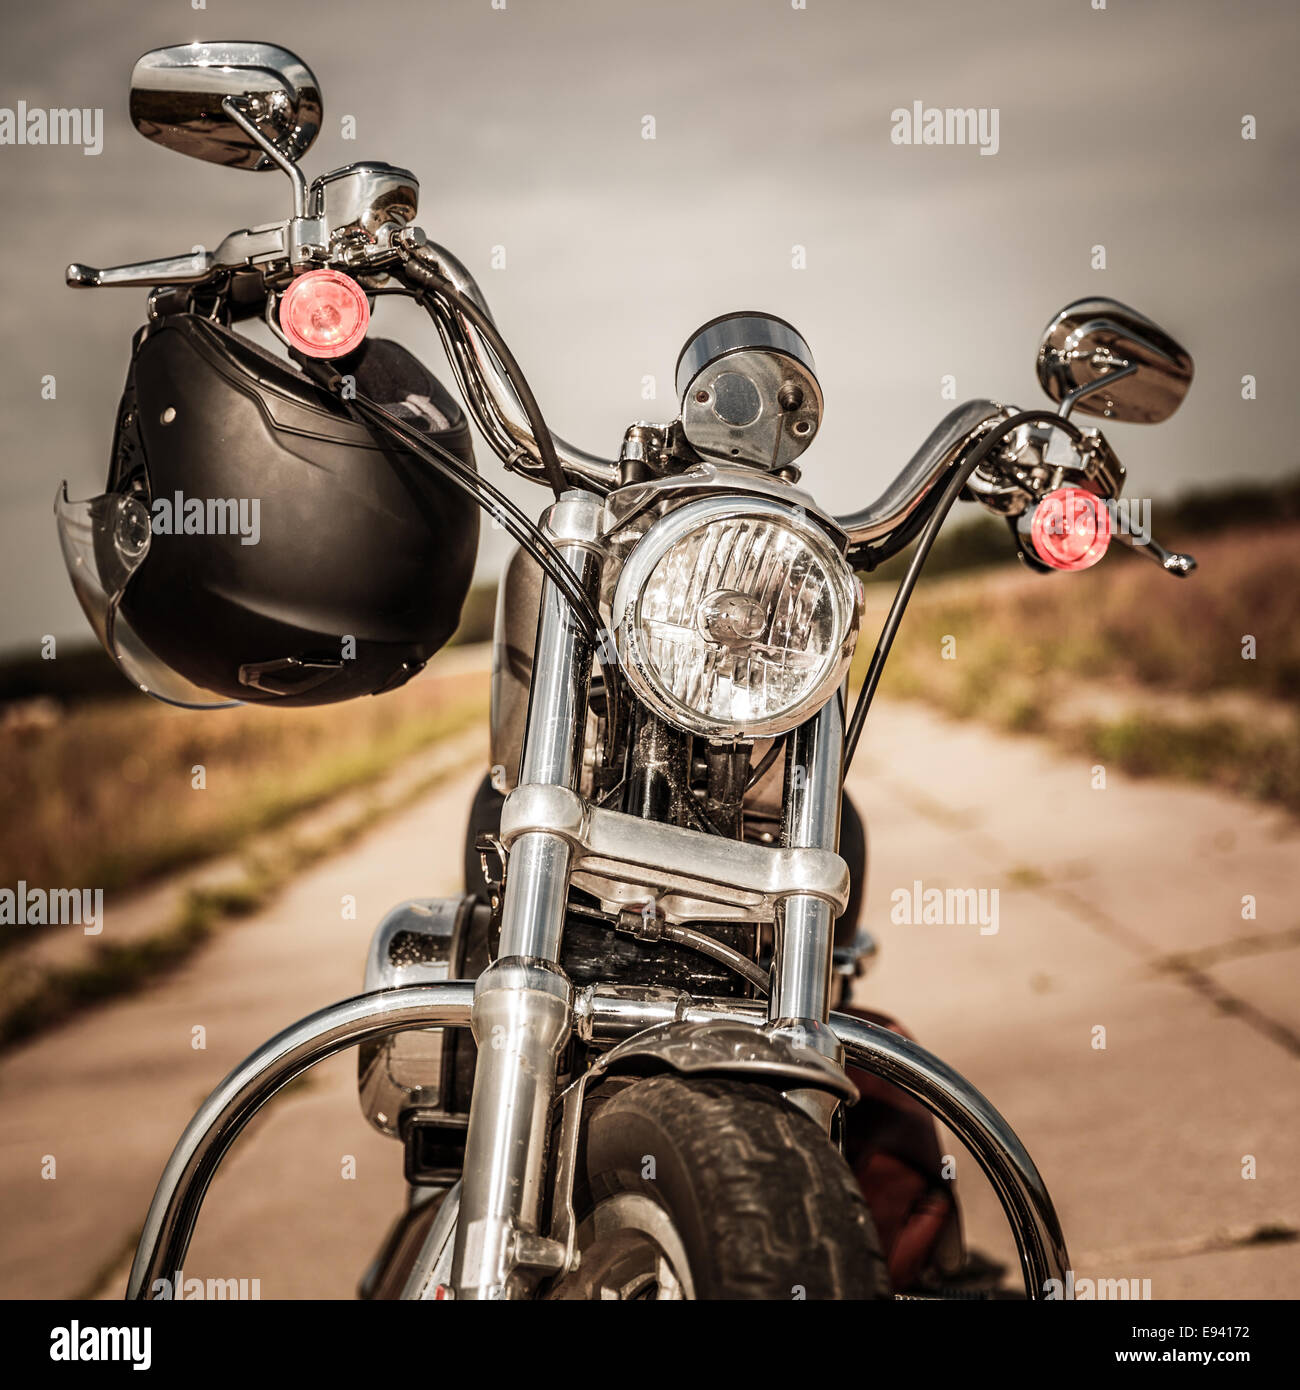 Motorcycle on the road with a helmet on the handlebars. Stock Photo